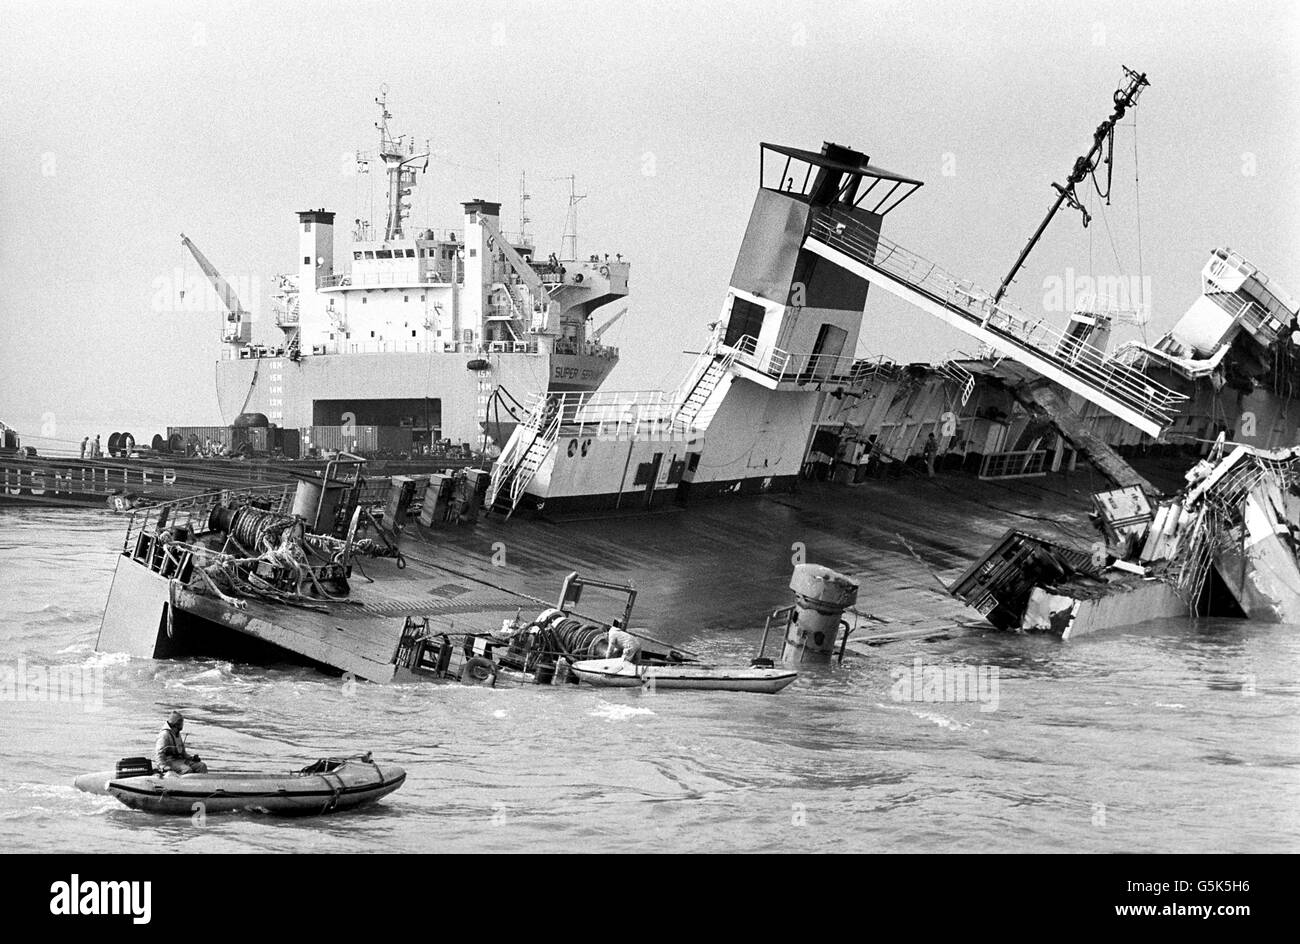 The damaged starboard-side of the European Gateway ferry, after it was pulled from a sandbank off Felixstowe. It was involved in a collision with another ferry on December 19th, in which six people died. Stock Photo